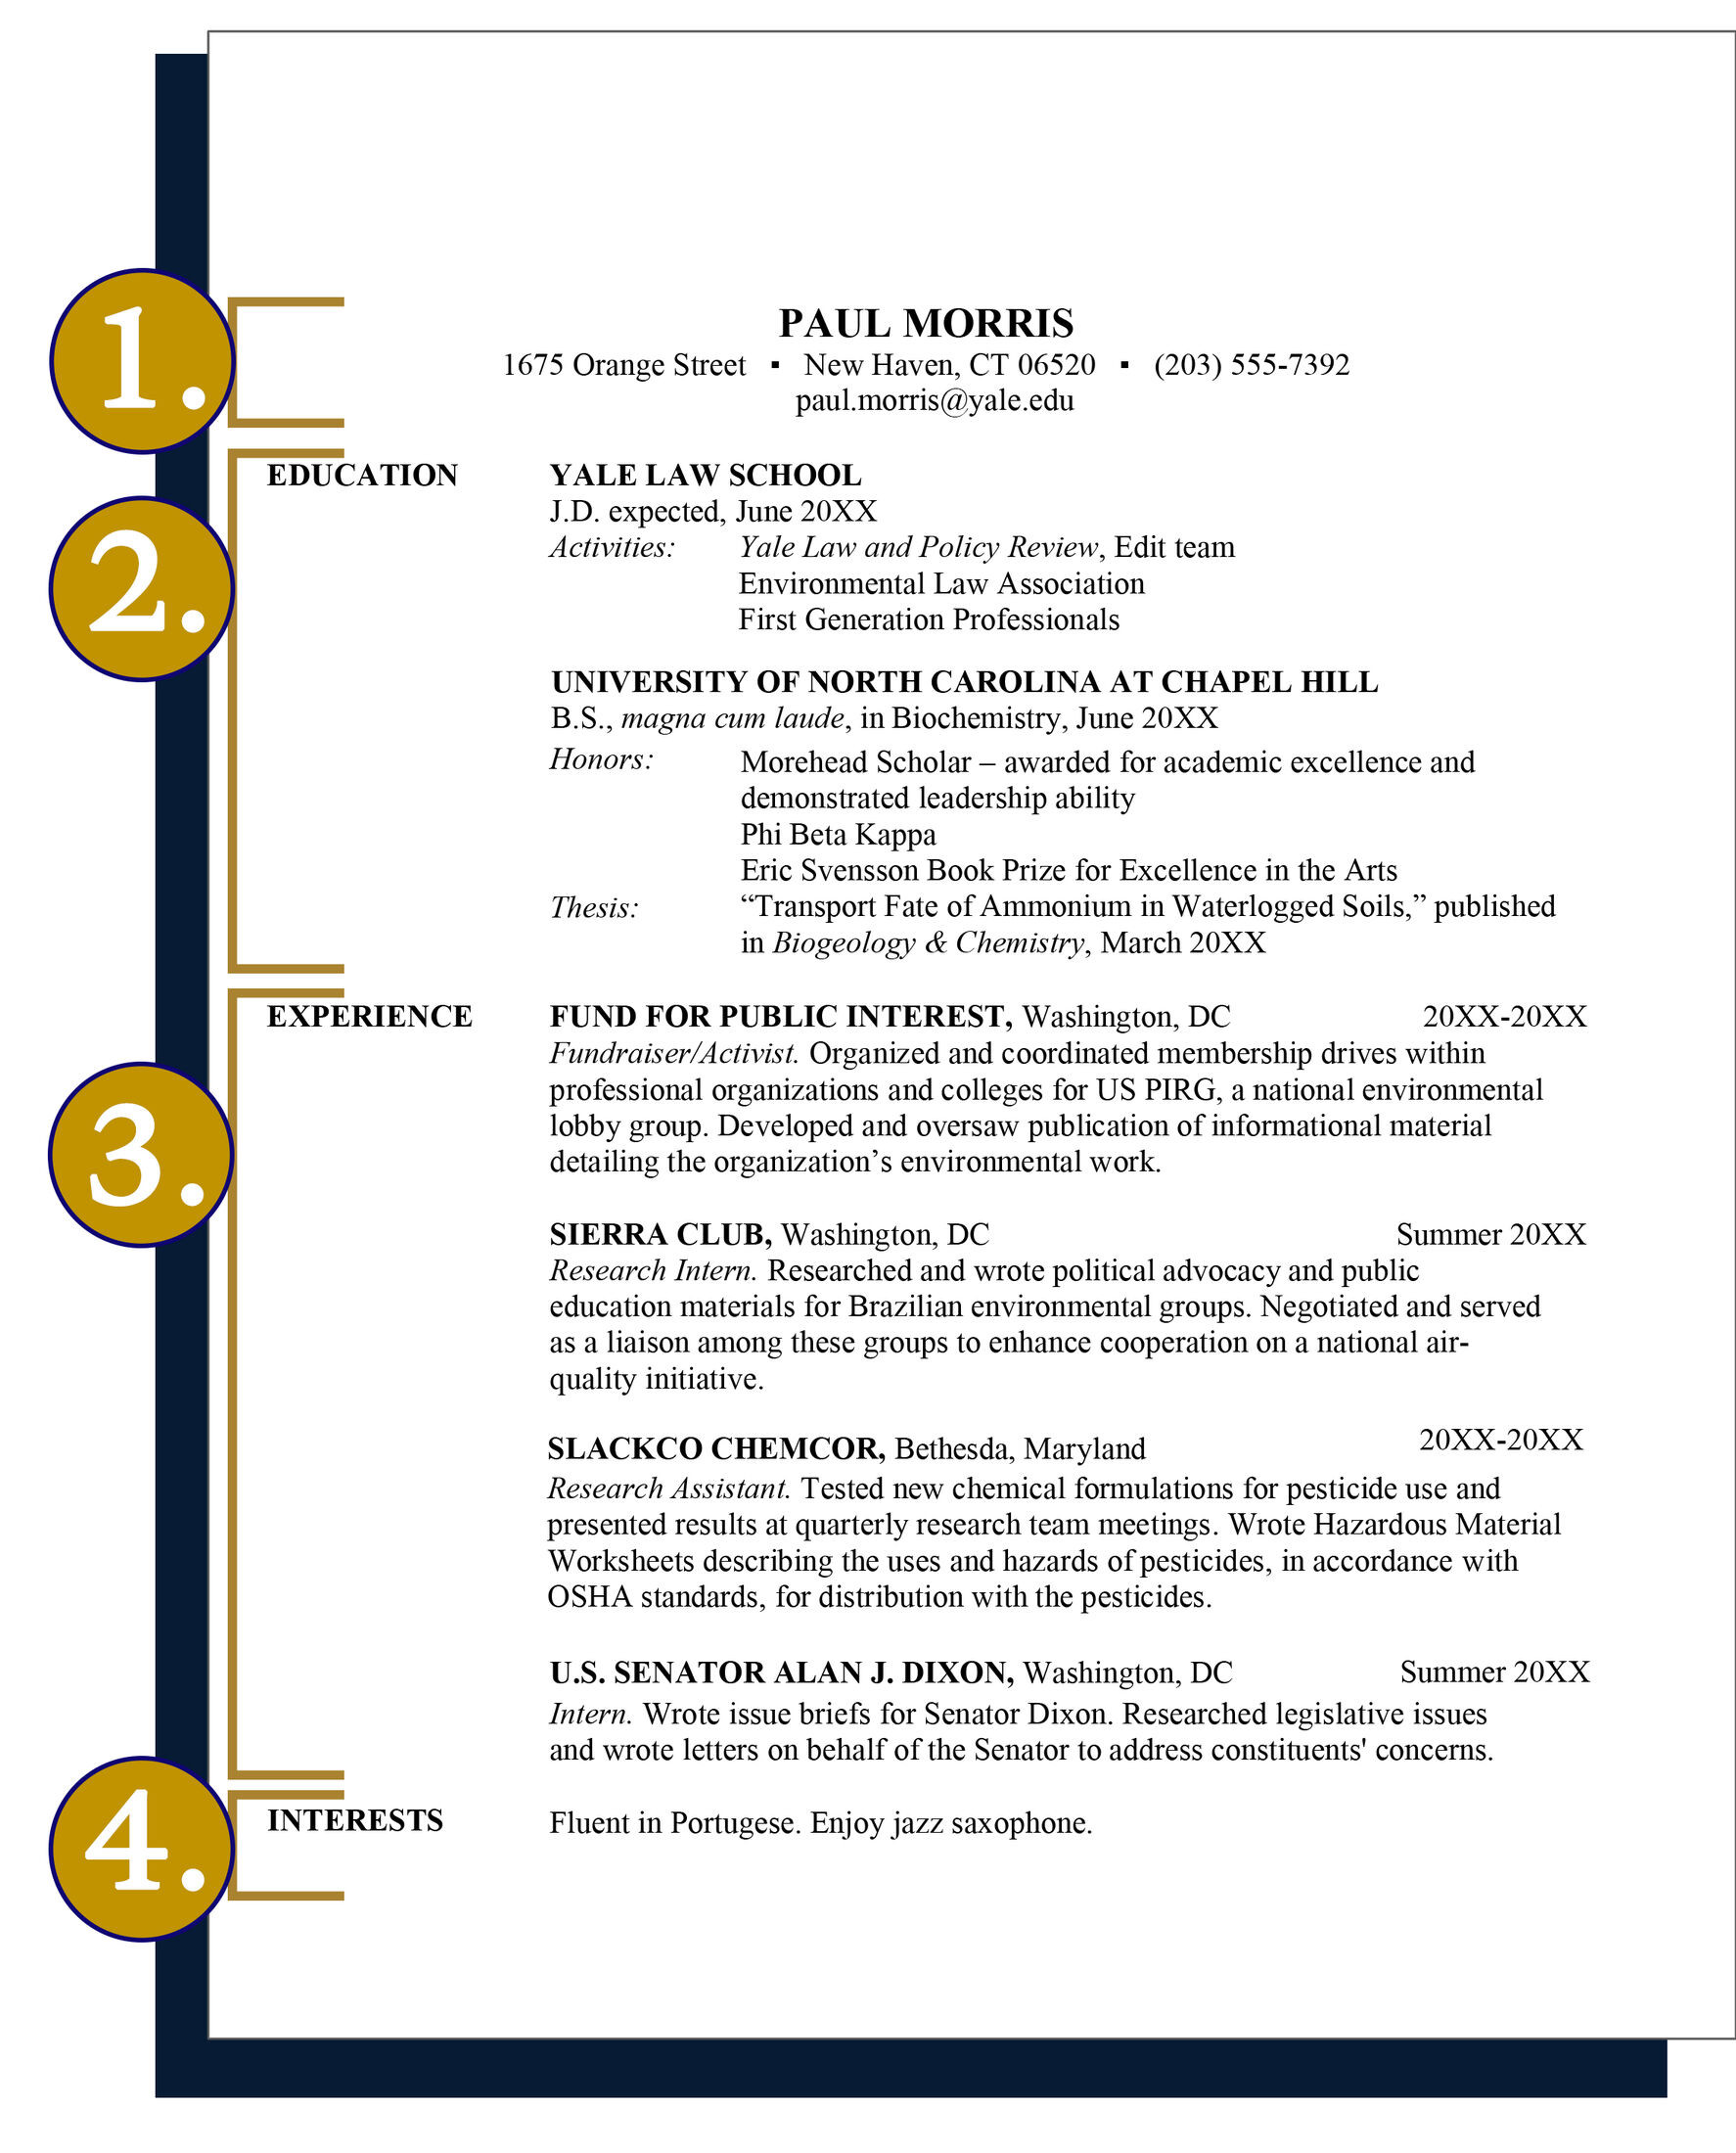 Sample Resume Expected Graduation Date format Resume Advice & Samples – Yale Law School